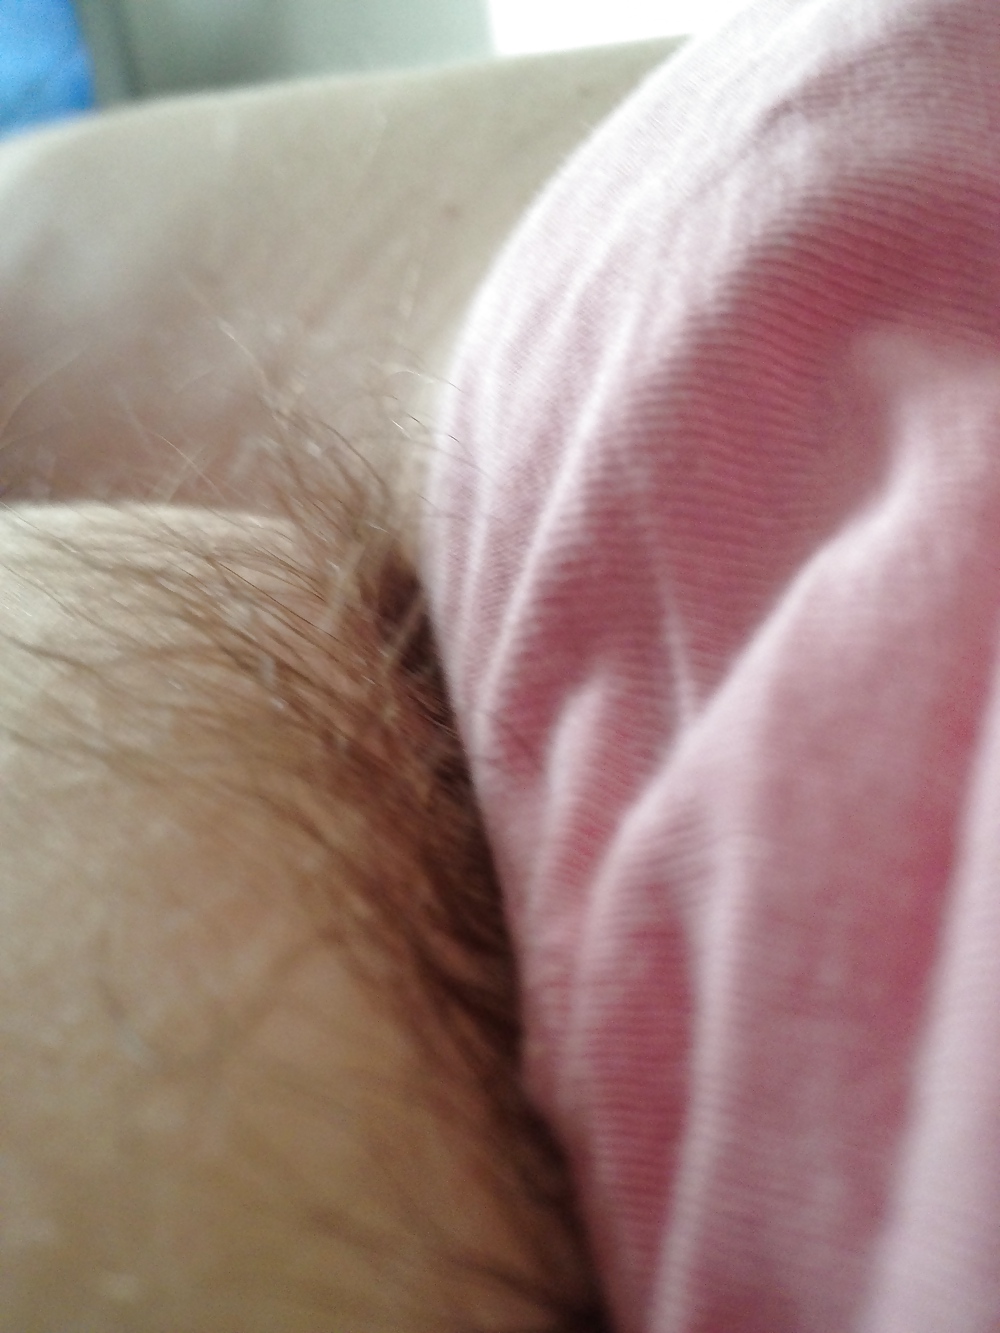 Porn image my bbw hairy pussy and titts.